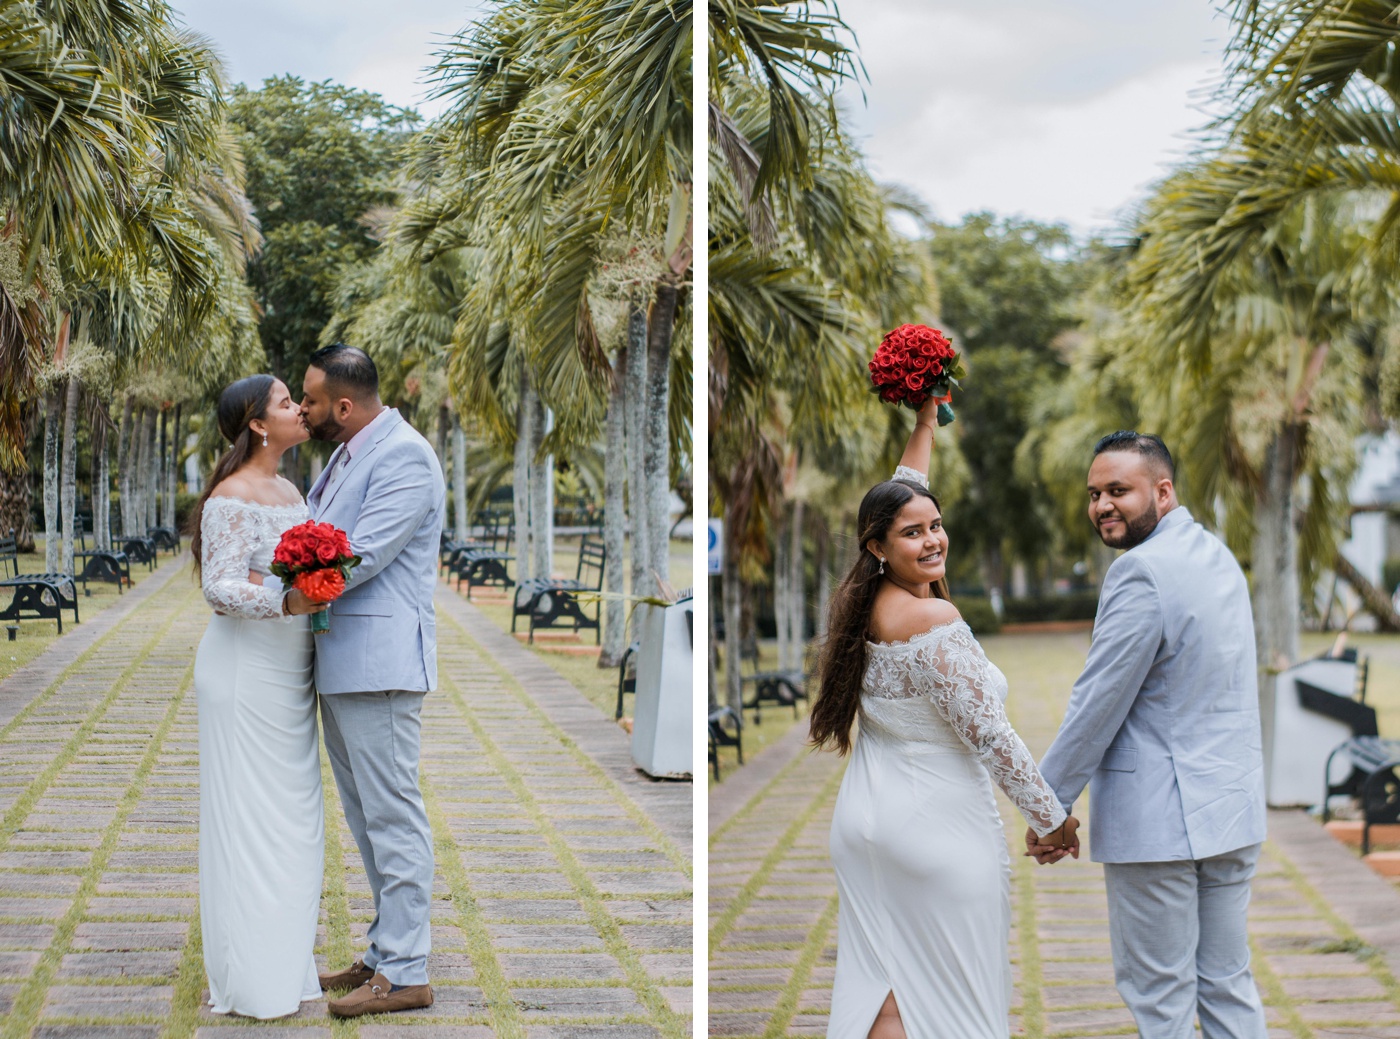 Bride and groom posing for portraits at their Dominican Republic wedding